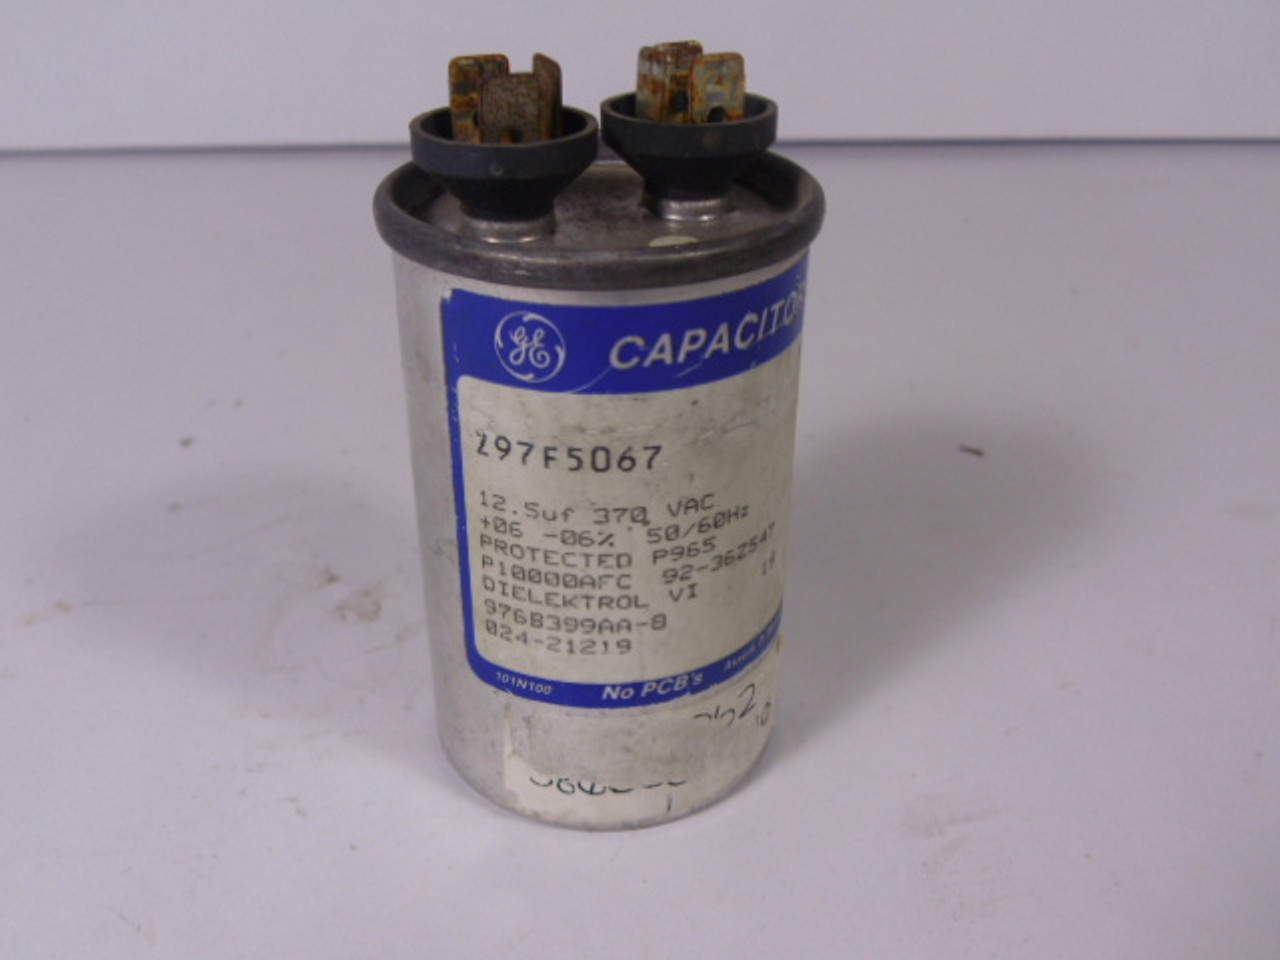 General Electric Z97F5067 Capacitor 12.5uf 370VAC 50/60Hz USED